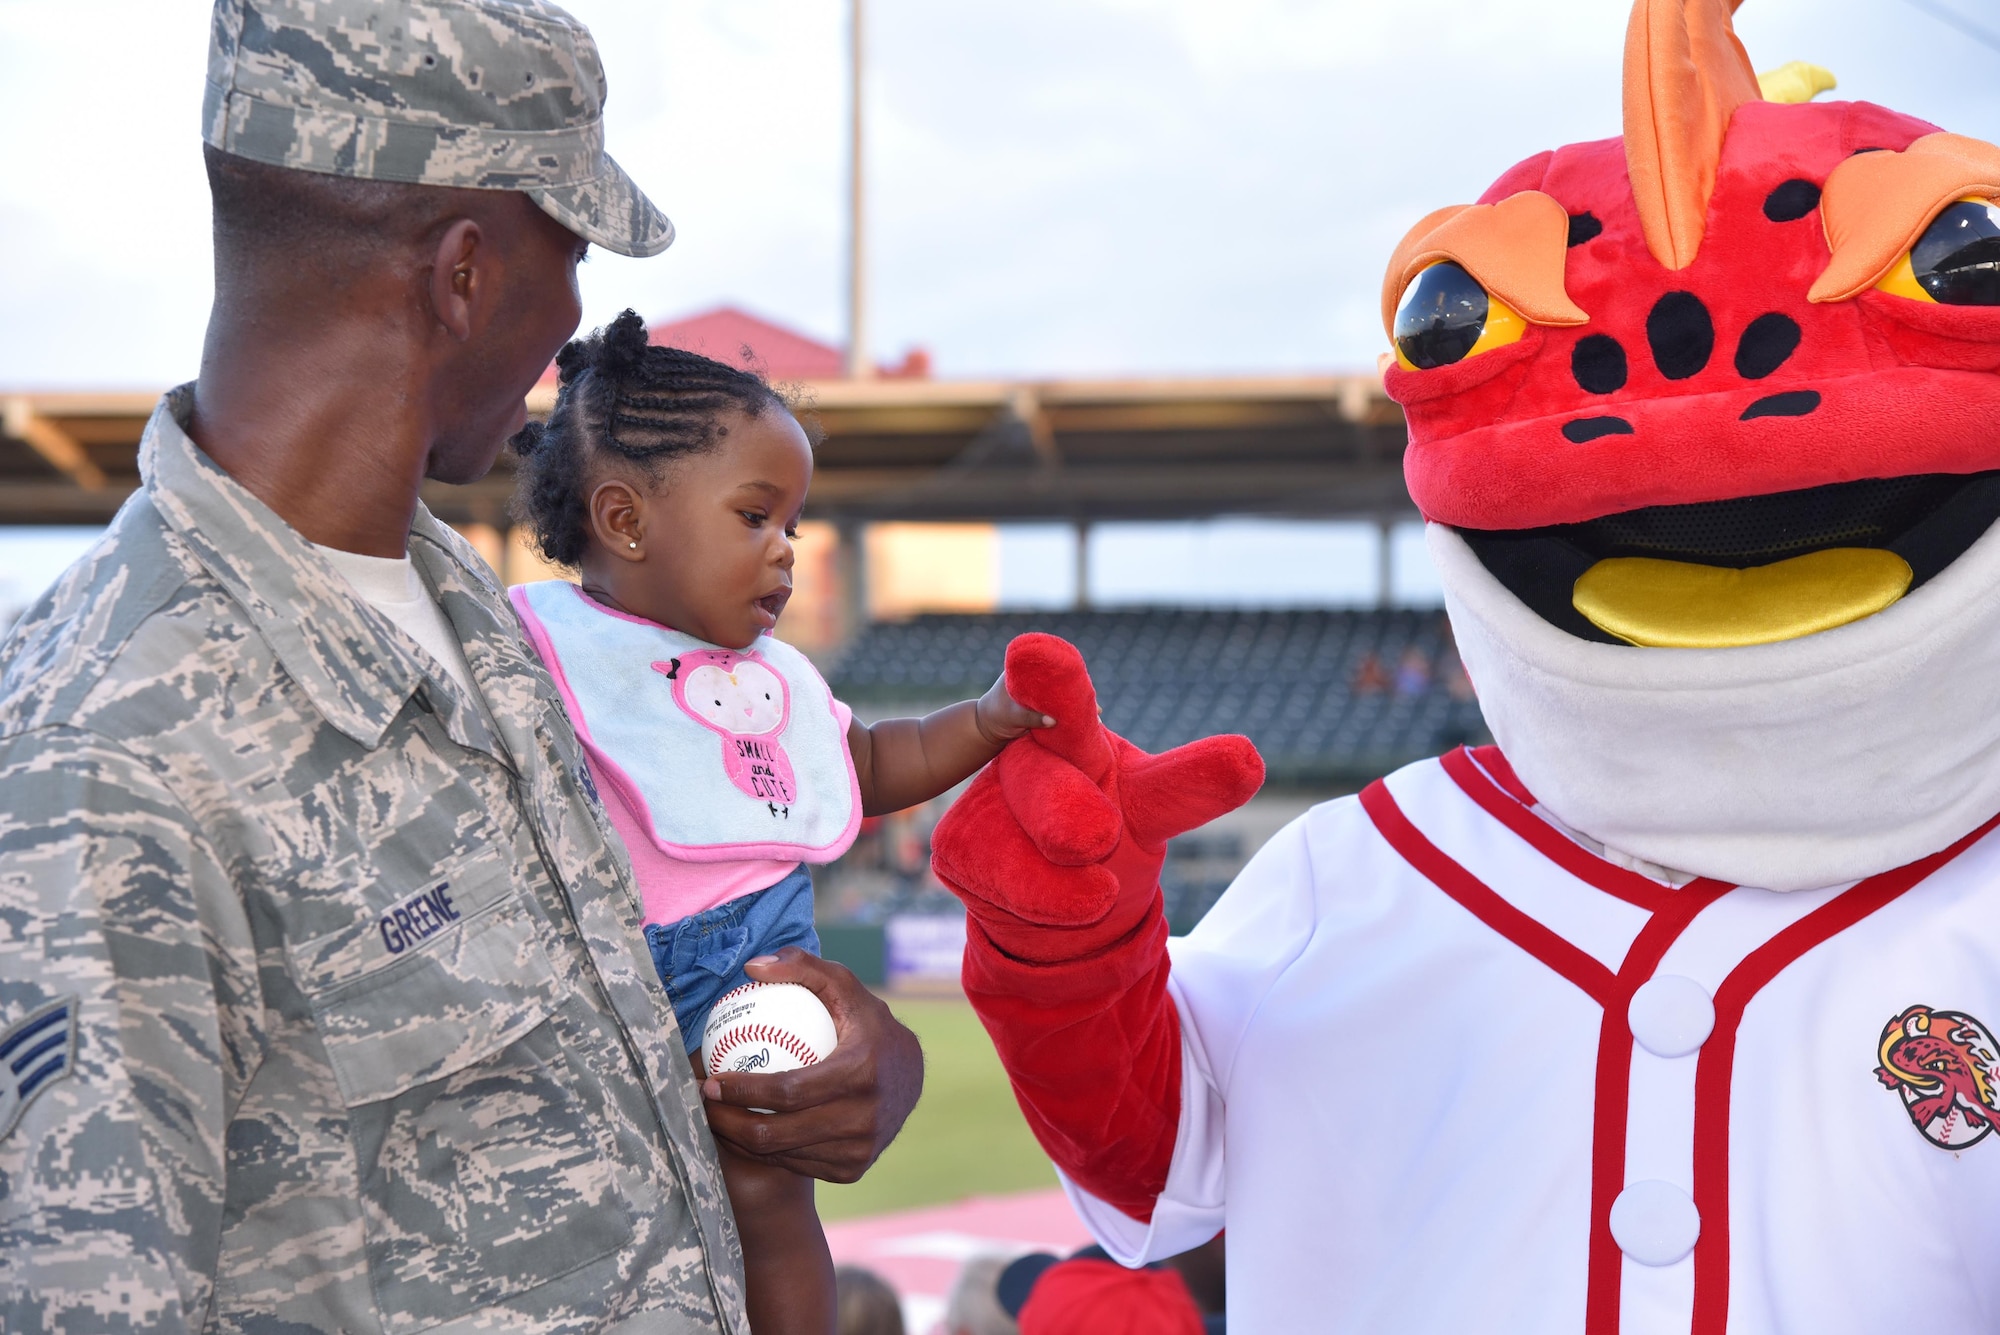 During a Florida Fire Frogs minor league baseball game August 18, 2017, the team not only honored all military and 1st responders, but they took time out to pay special tribute to Senior Airman Kevin Greene, the 920th Rescue Wing’s first single amputee to return to military service after a tragic accident resulted in the amputation of part of his left leg. He attended the game with his little girl and girlfriend. (U.S. Air Force photo/Maj. Cathleen Snow)